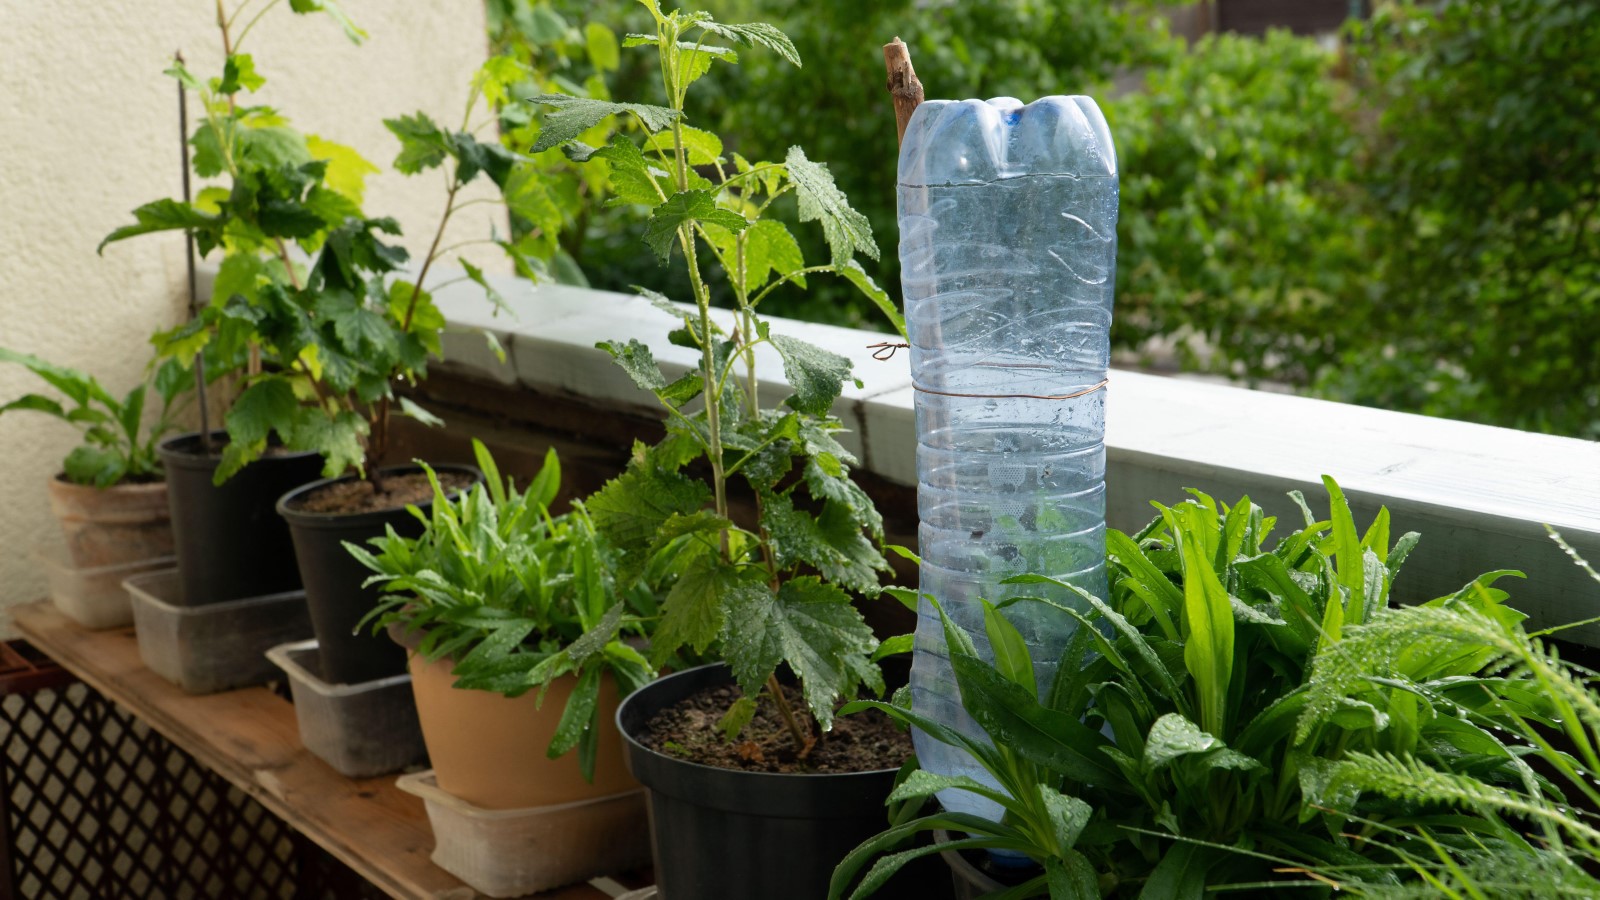 DIY Self-Watering System for Houseplants